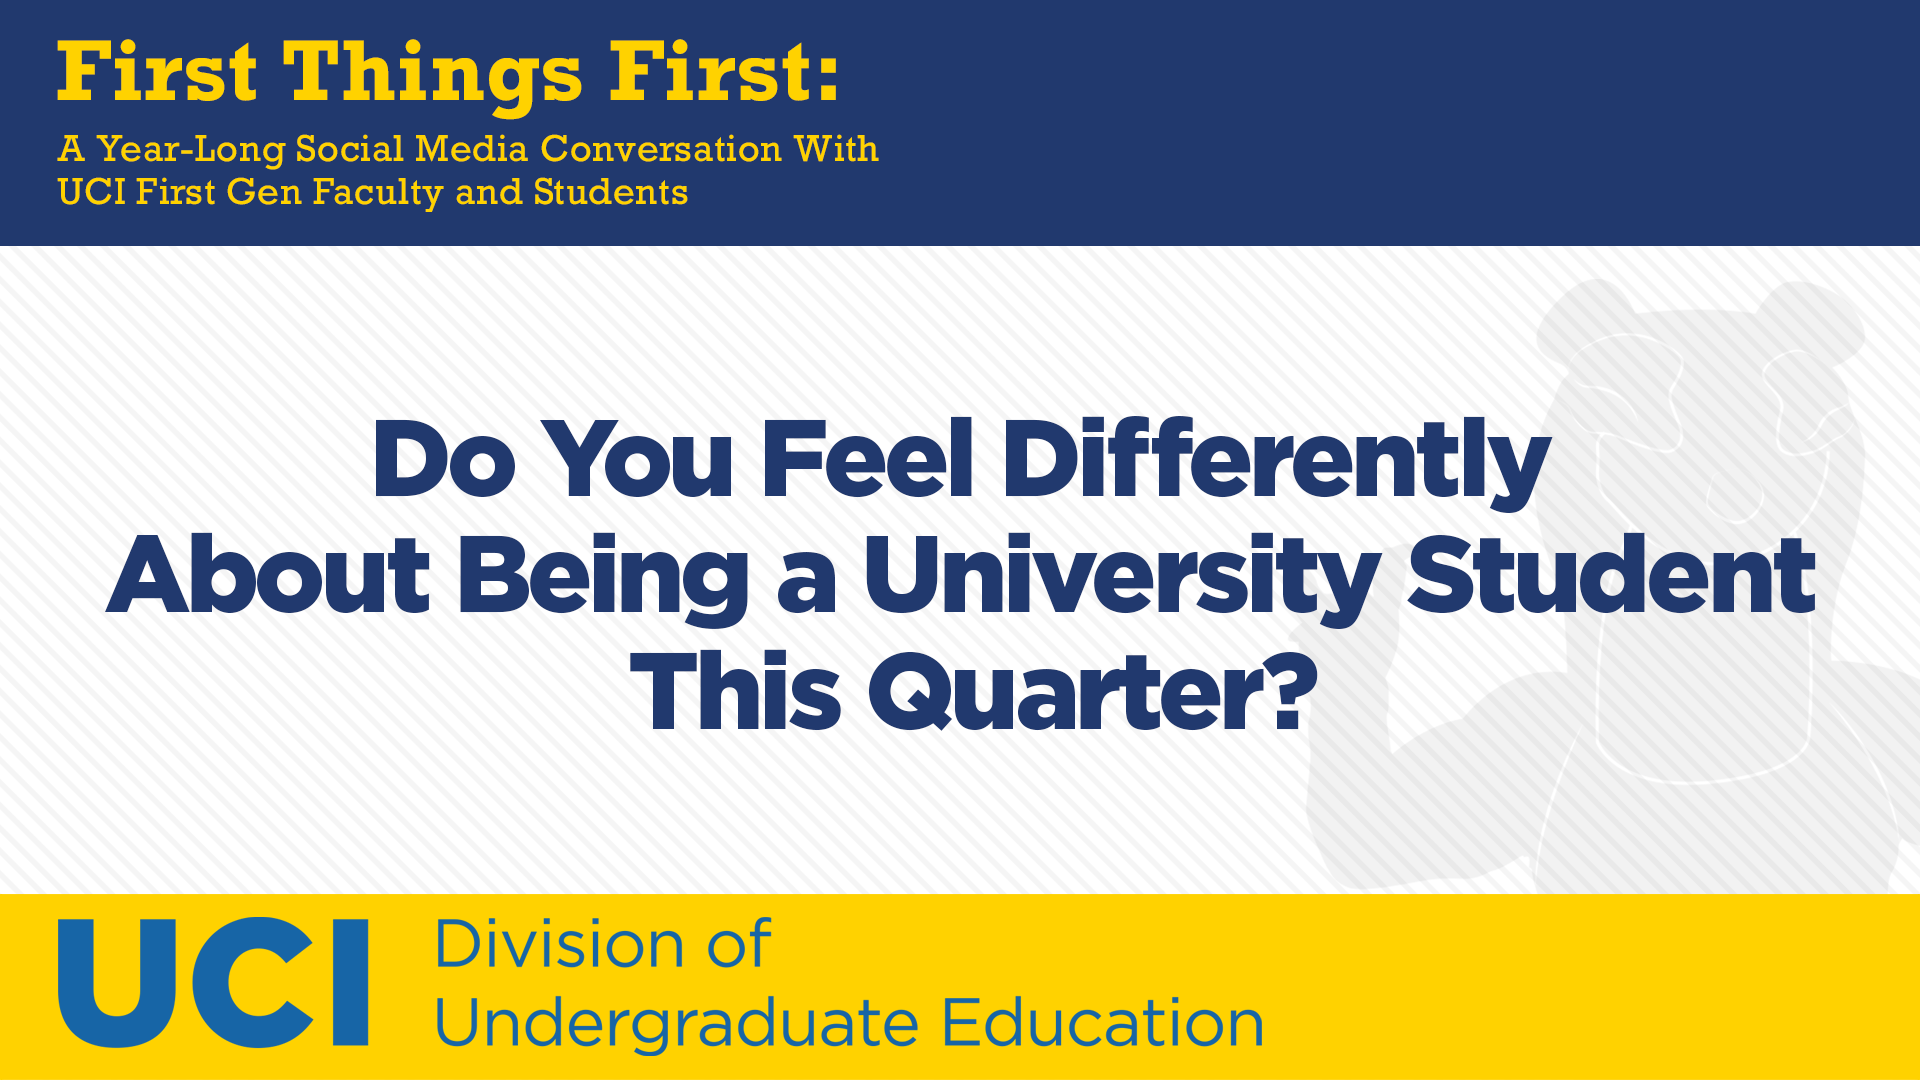 Do You Feel Differently About Being a University Student This Quarter?